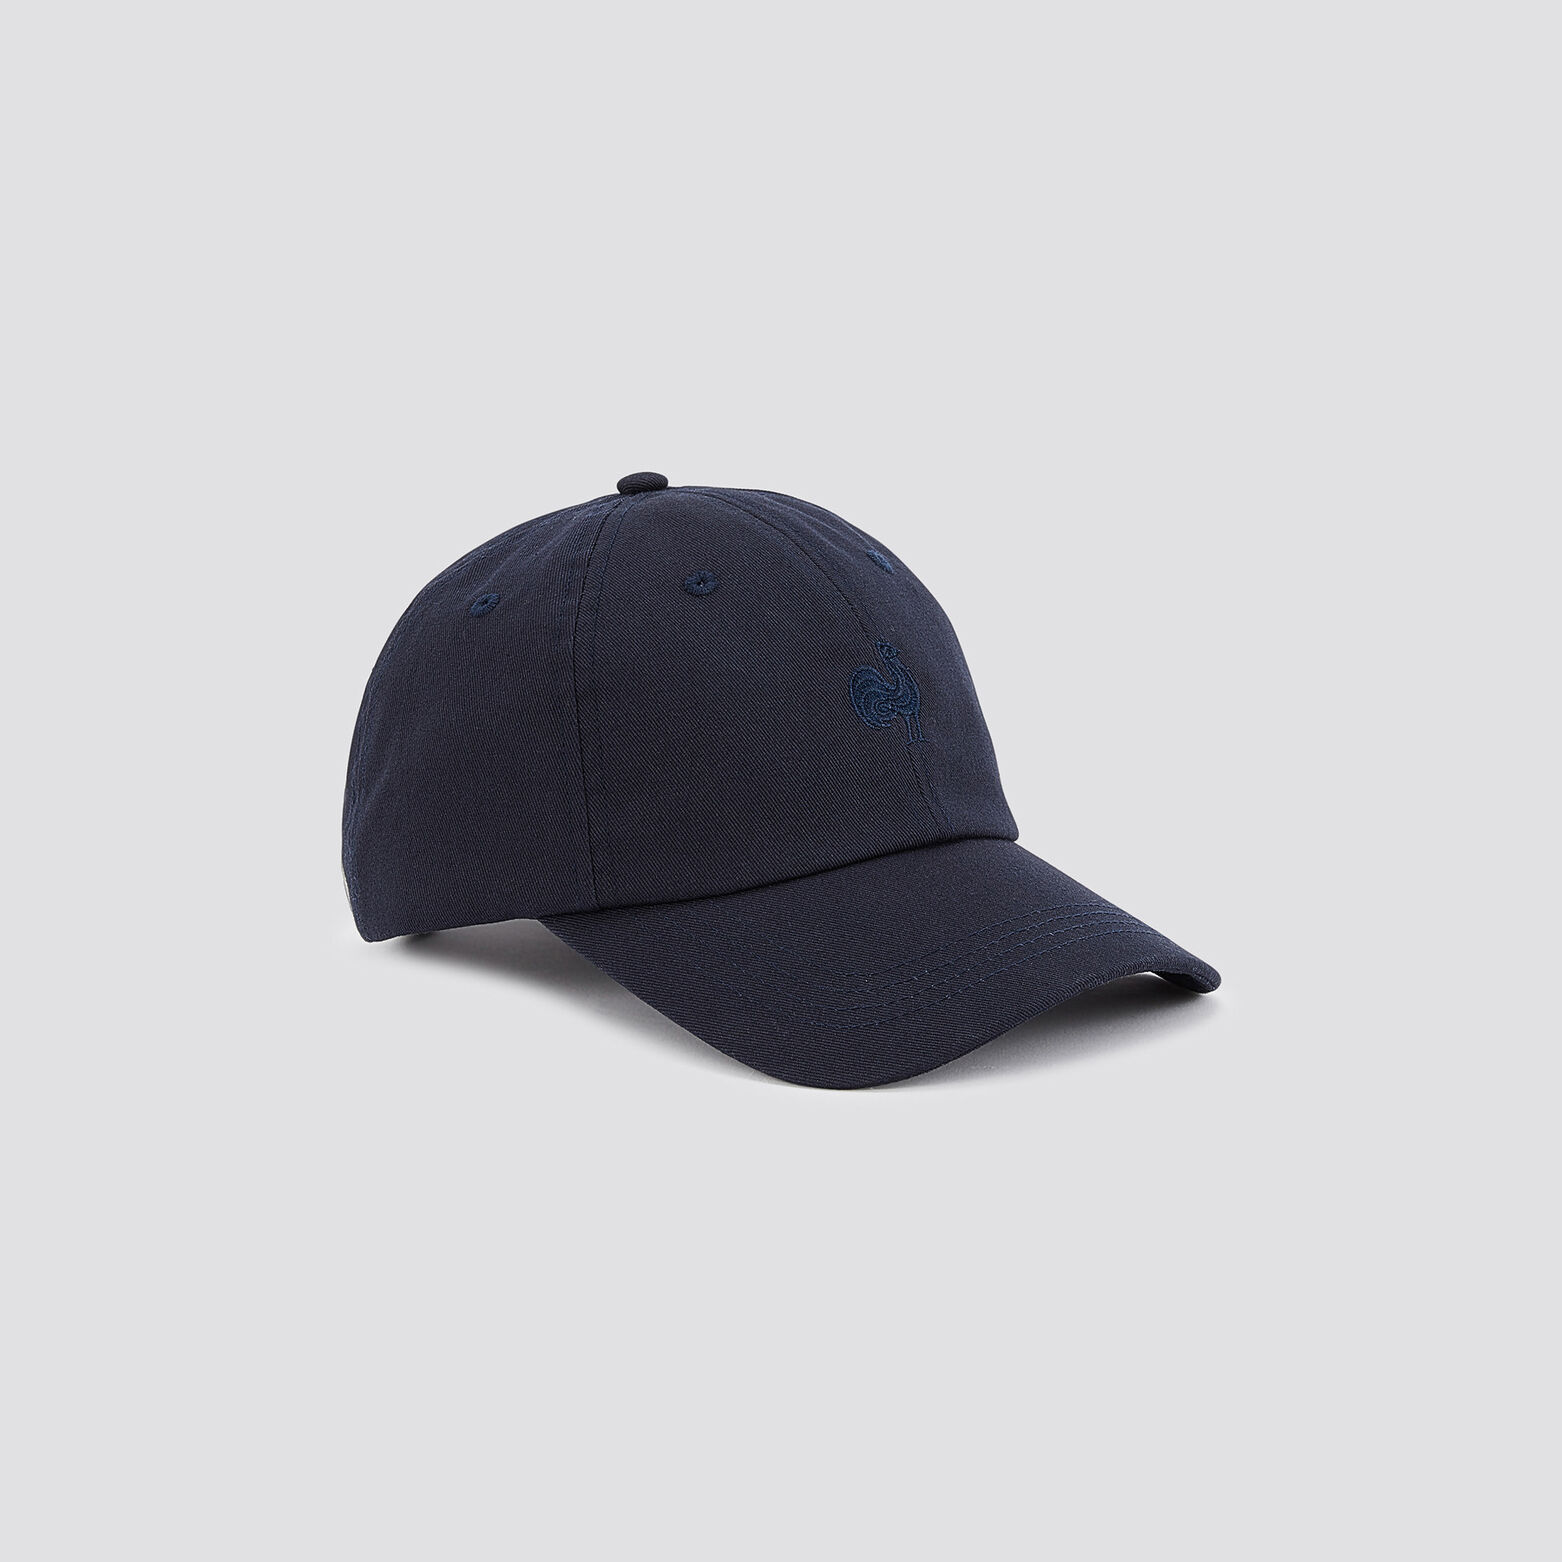 Casquette licence France rugby